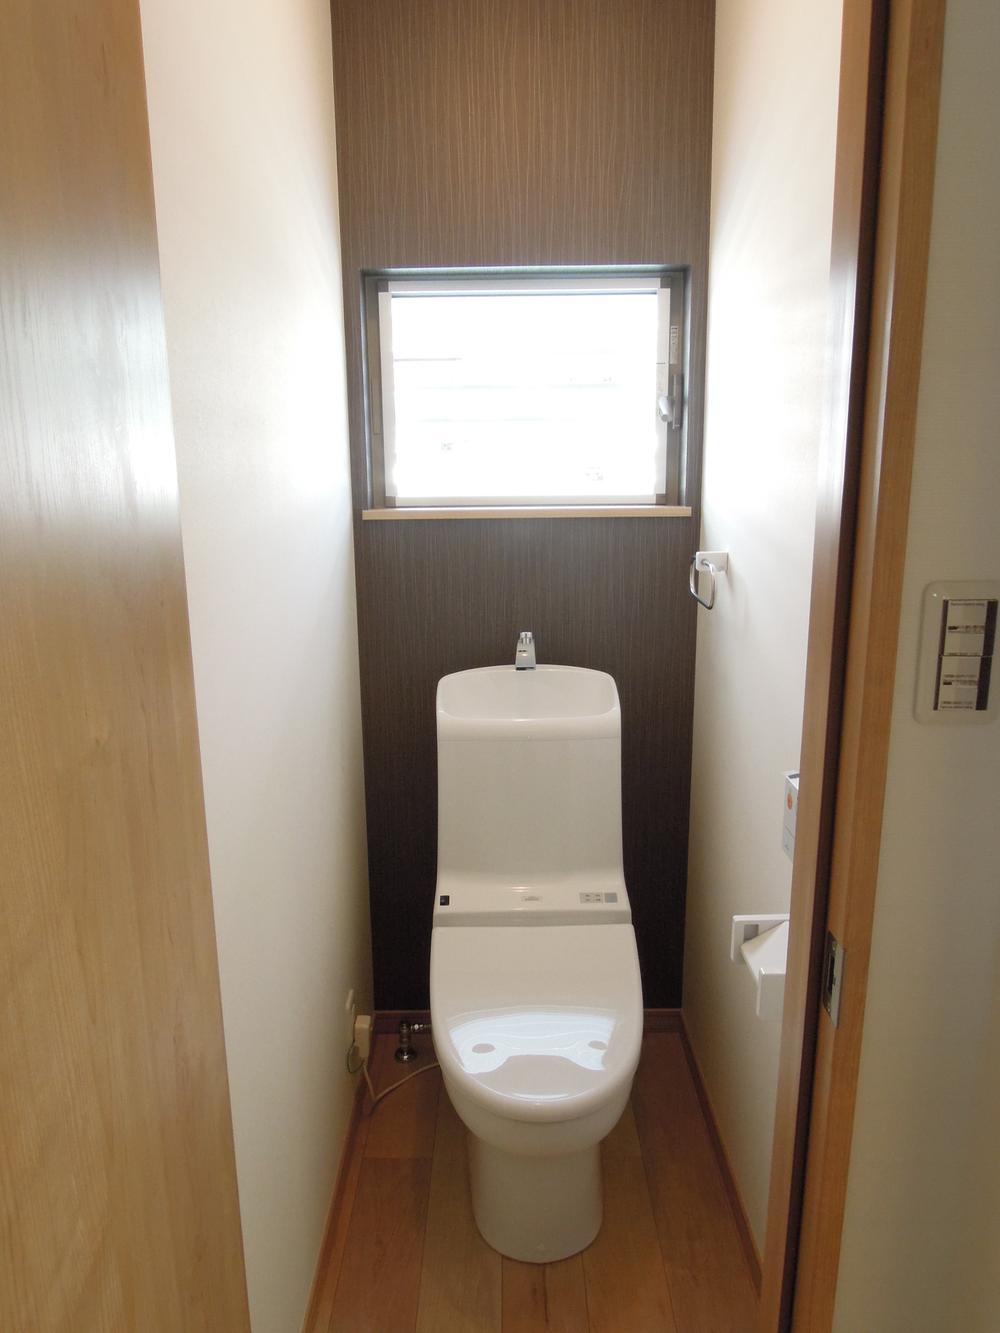 Model house photo. Our specification toilet: with Washlet ・ Hand wash with toilet seat